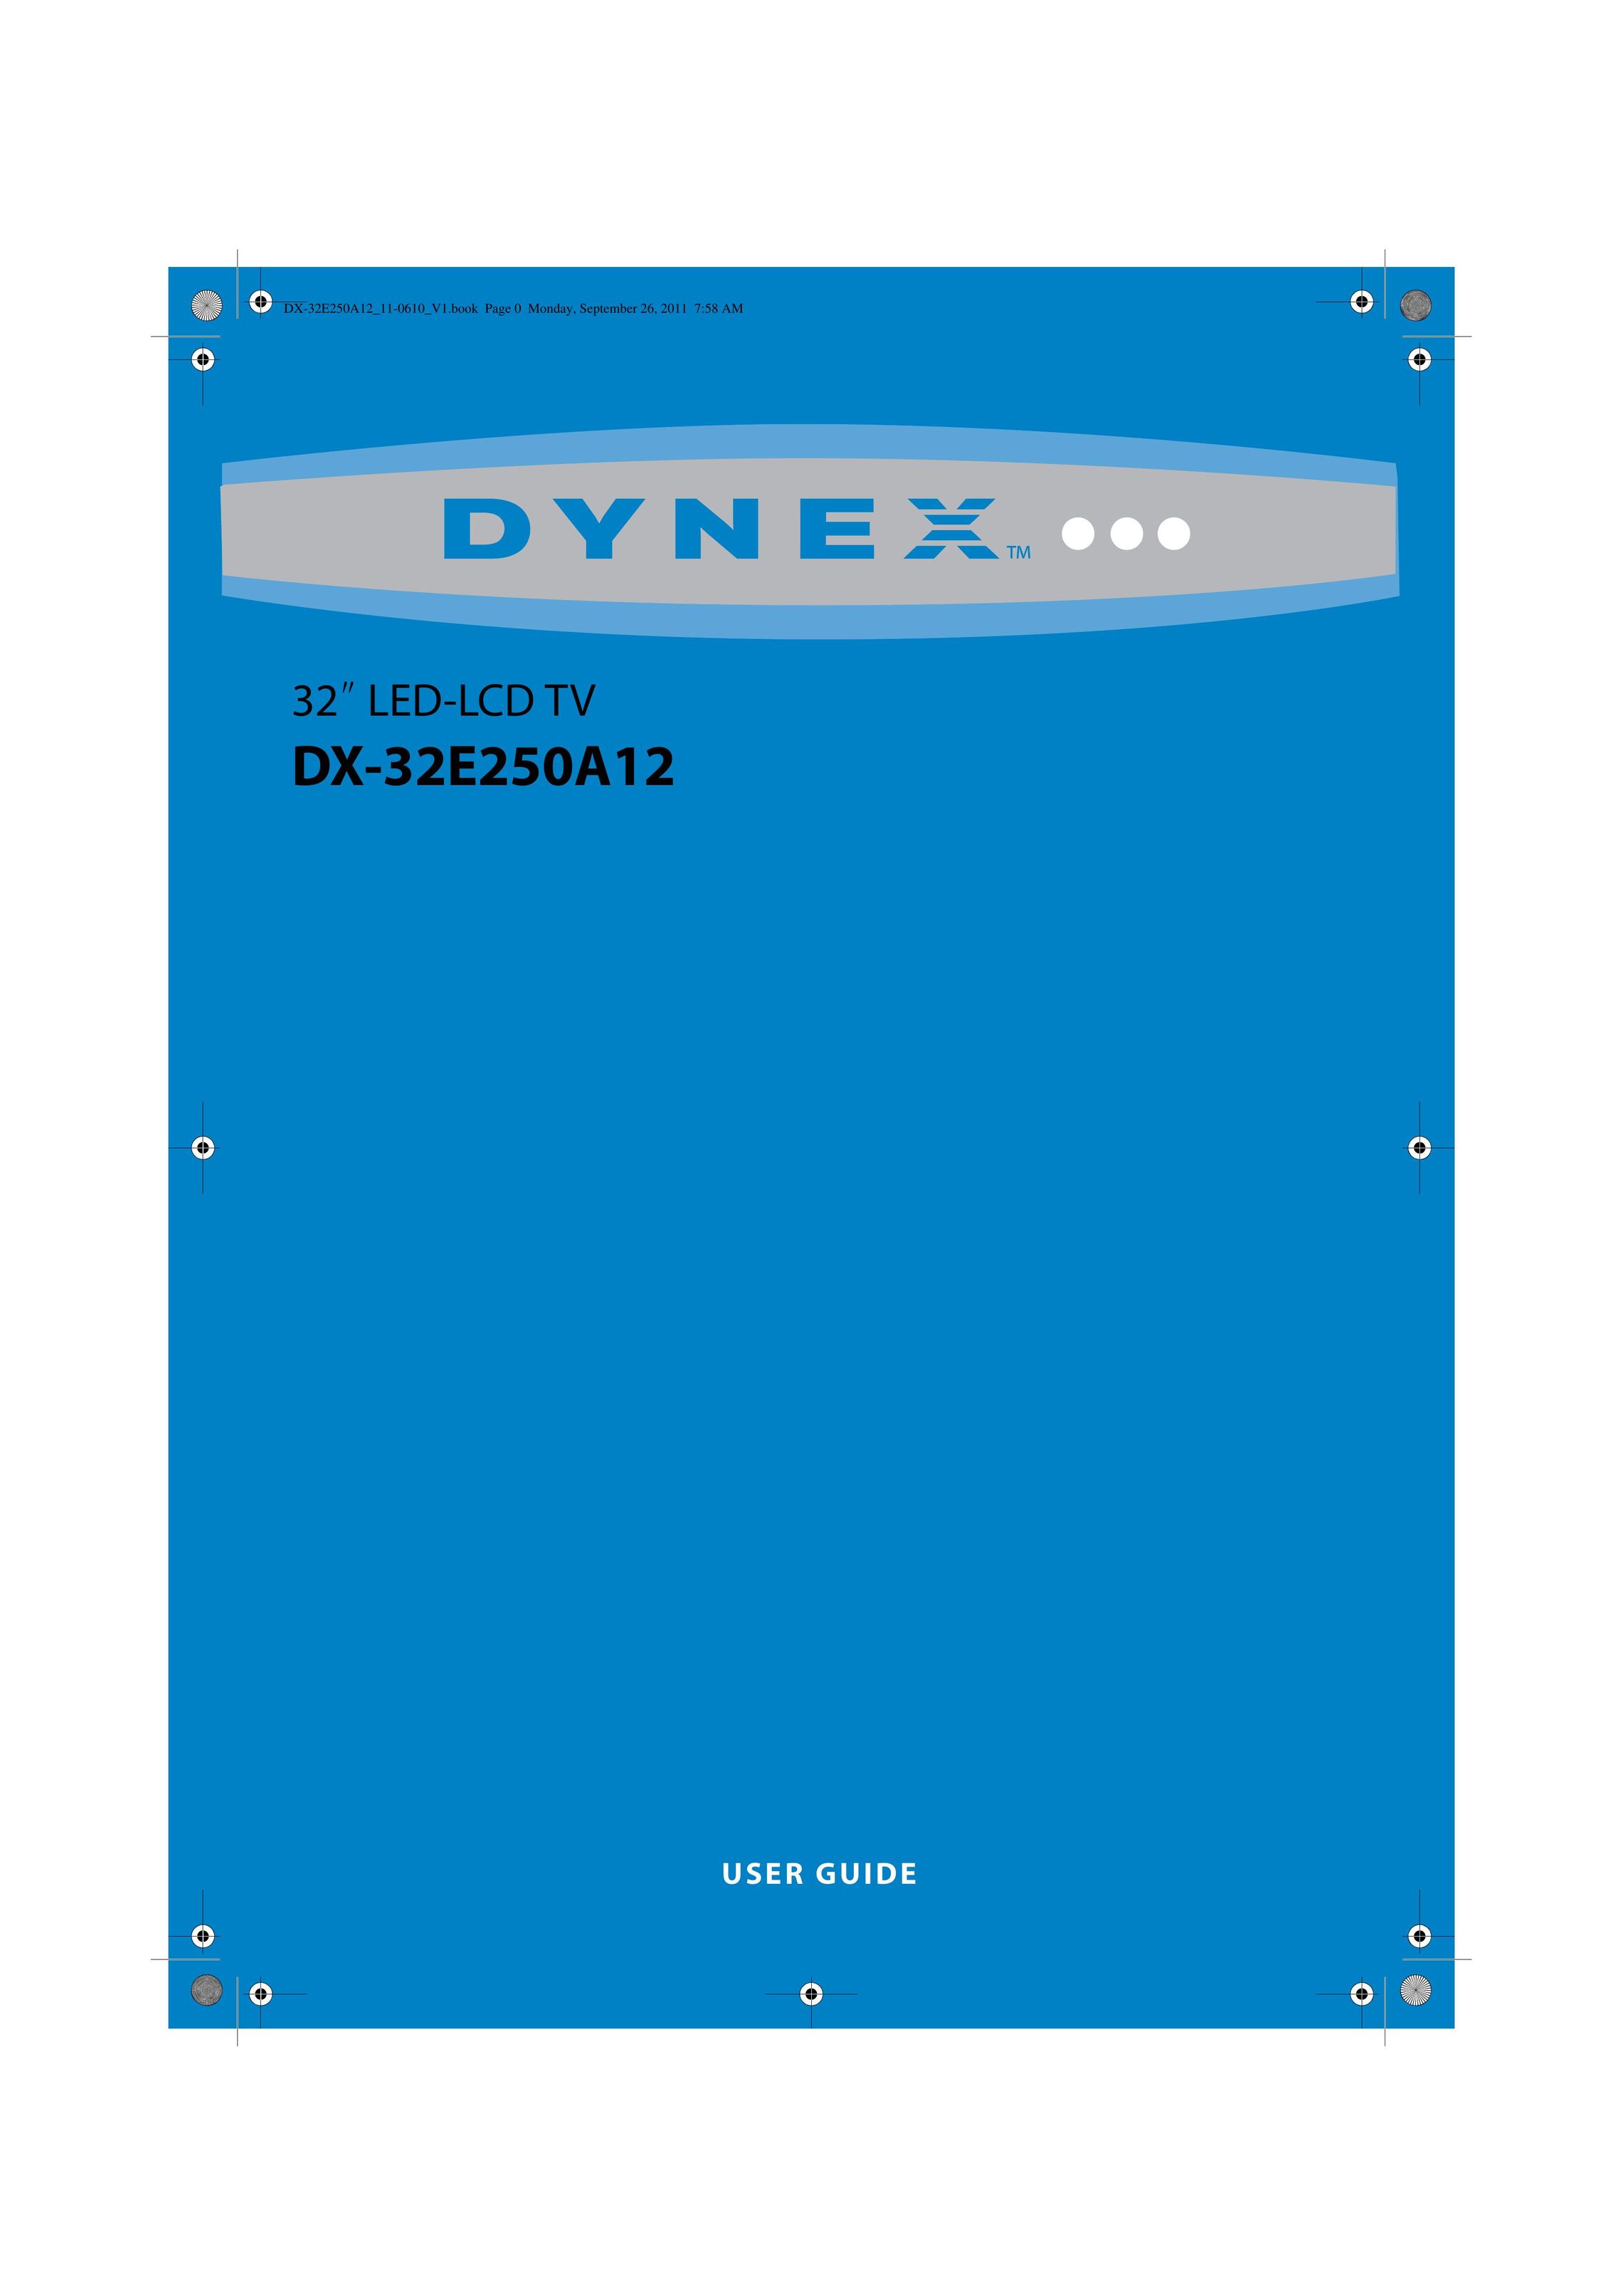 Dynex DX-32E250A12 Flat Panel Television User Manual (Page 1)